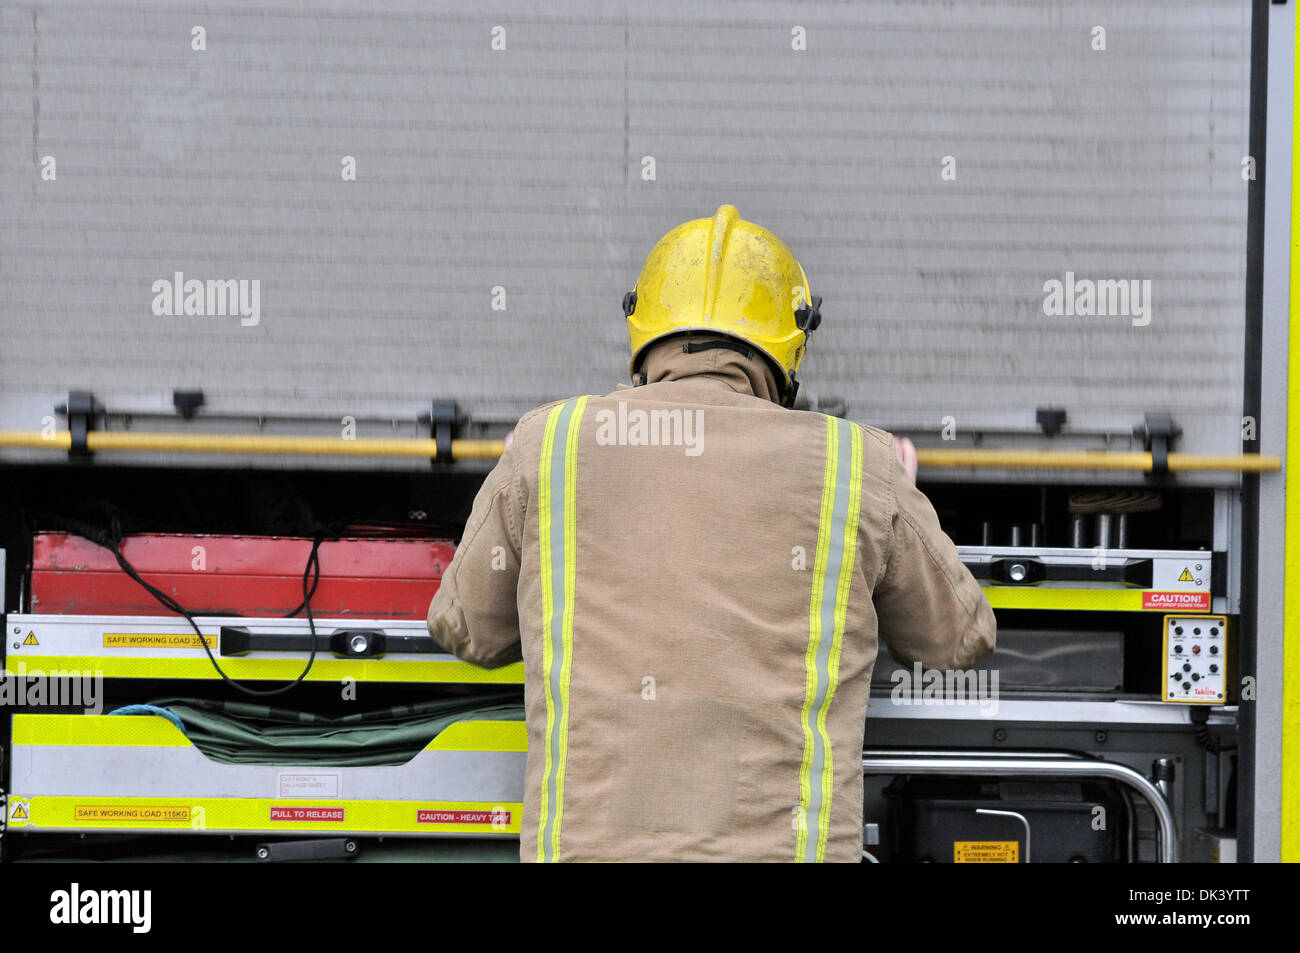 Firefighter closing the side compartment on a Scottish Fire and Rescue Service fire engine. Stock Photo